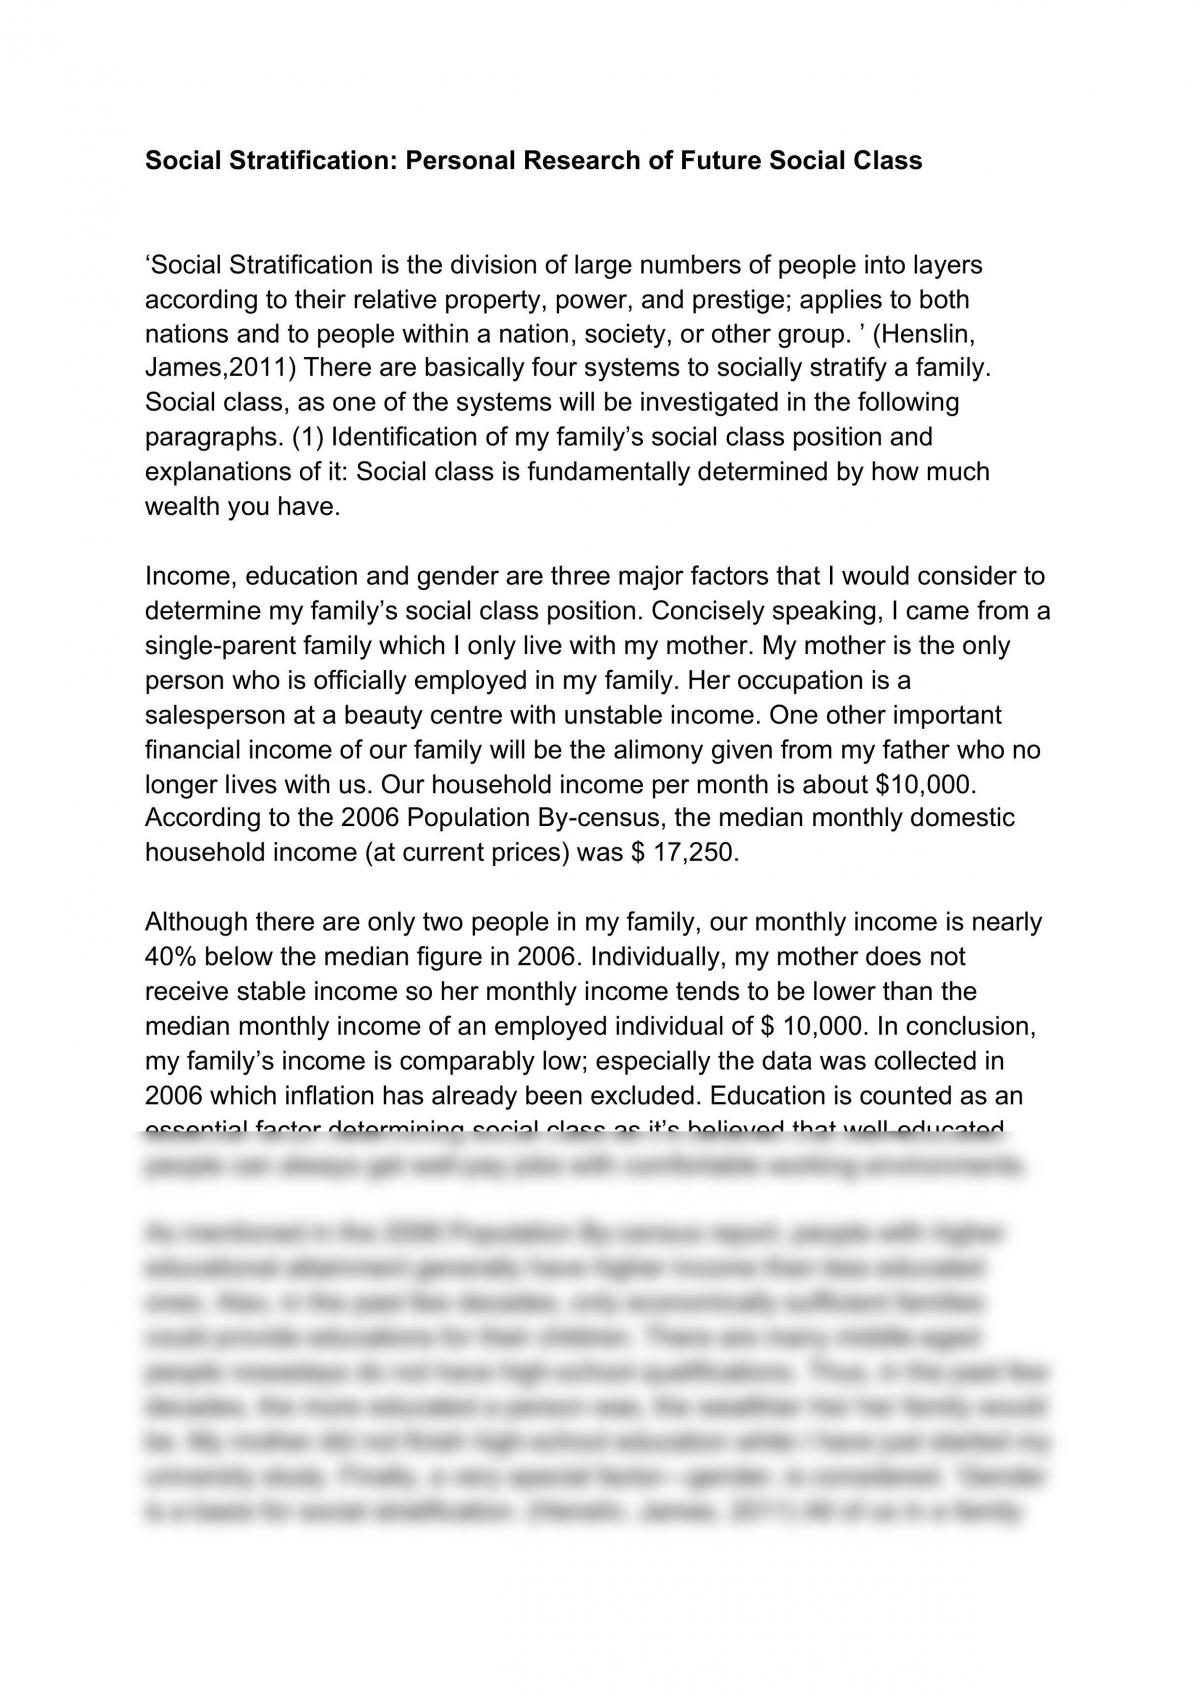 Social Stratification: Personal Research of Future Social Class - Page 1